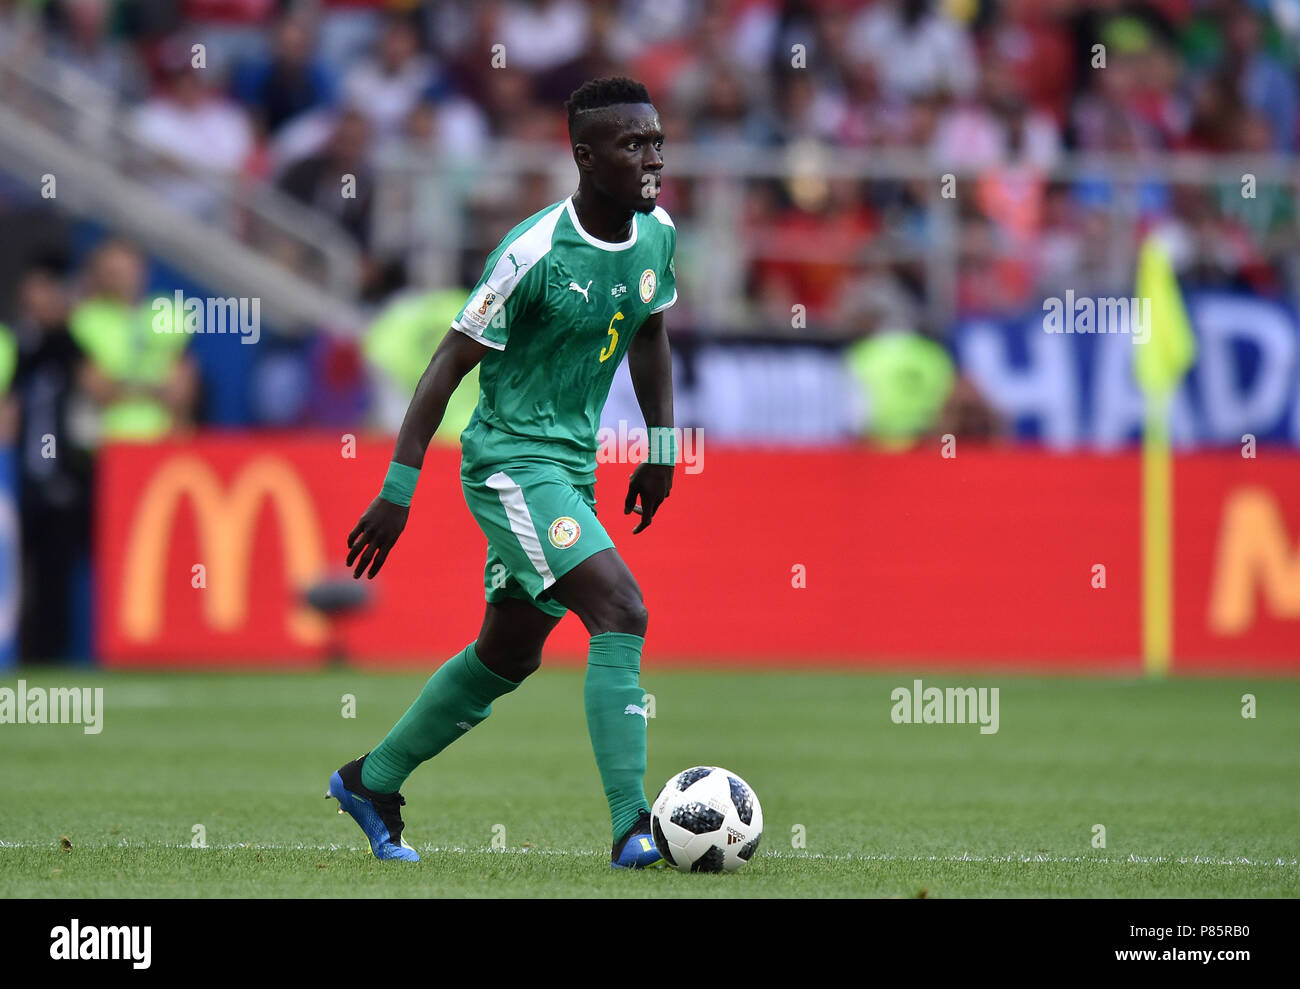 MOSCOW, RUSSIA - JUNE 19: Idrissa Gueye of Senegal in action during the 2018 FIFA World Cup Russia group H match between Poland and Senegal at Spartak Stadium on June 19, 2018 in Moscow, Russia. (Photo by Lukasz Laskowski/PressFocus/MB Media) Stock Photo